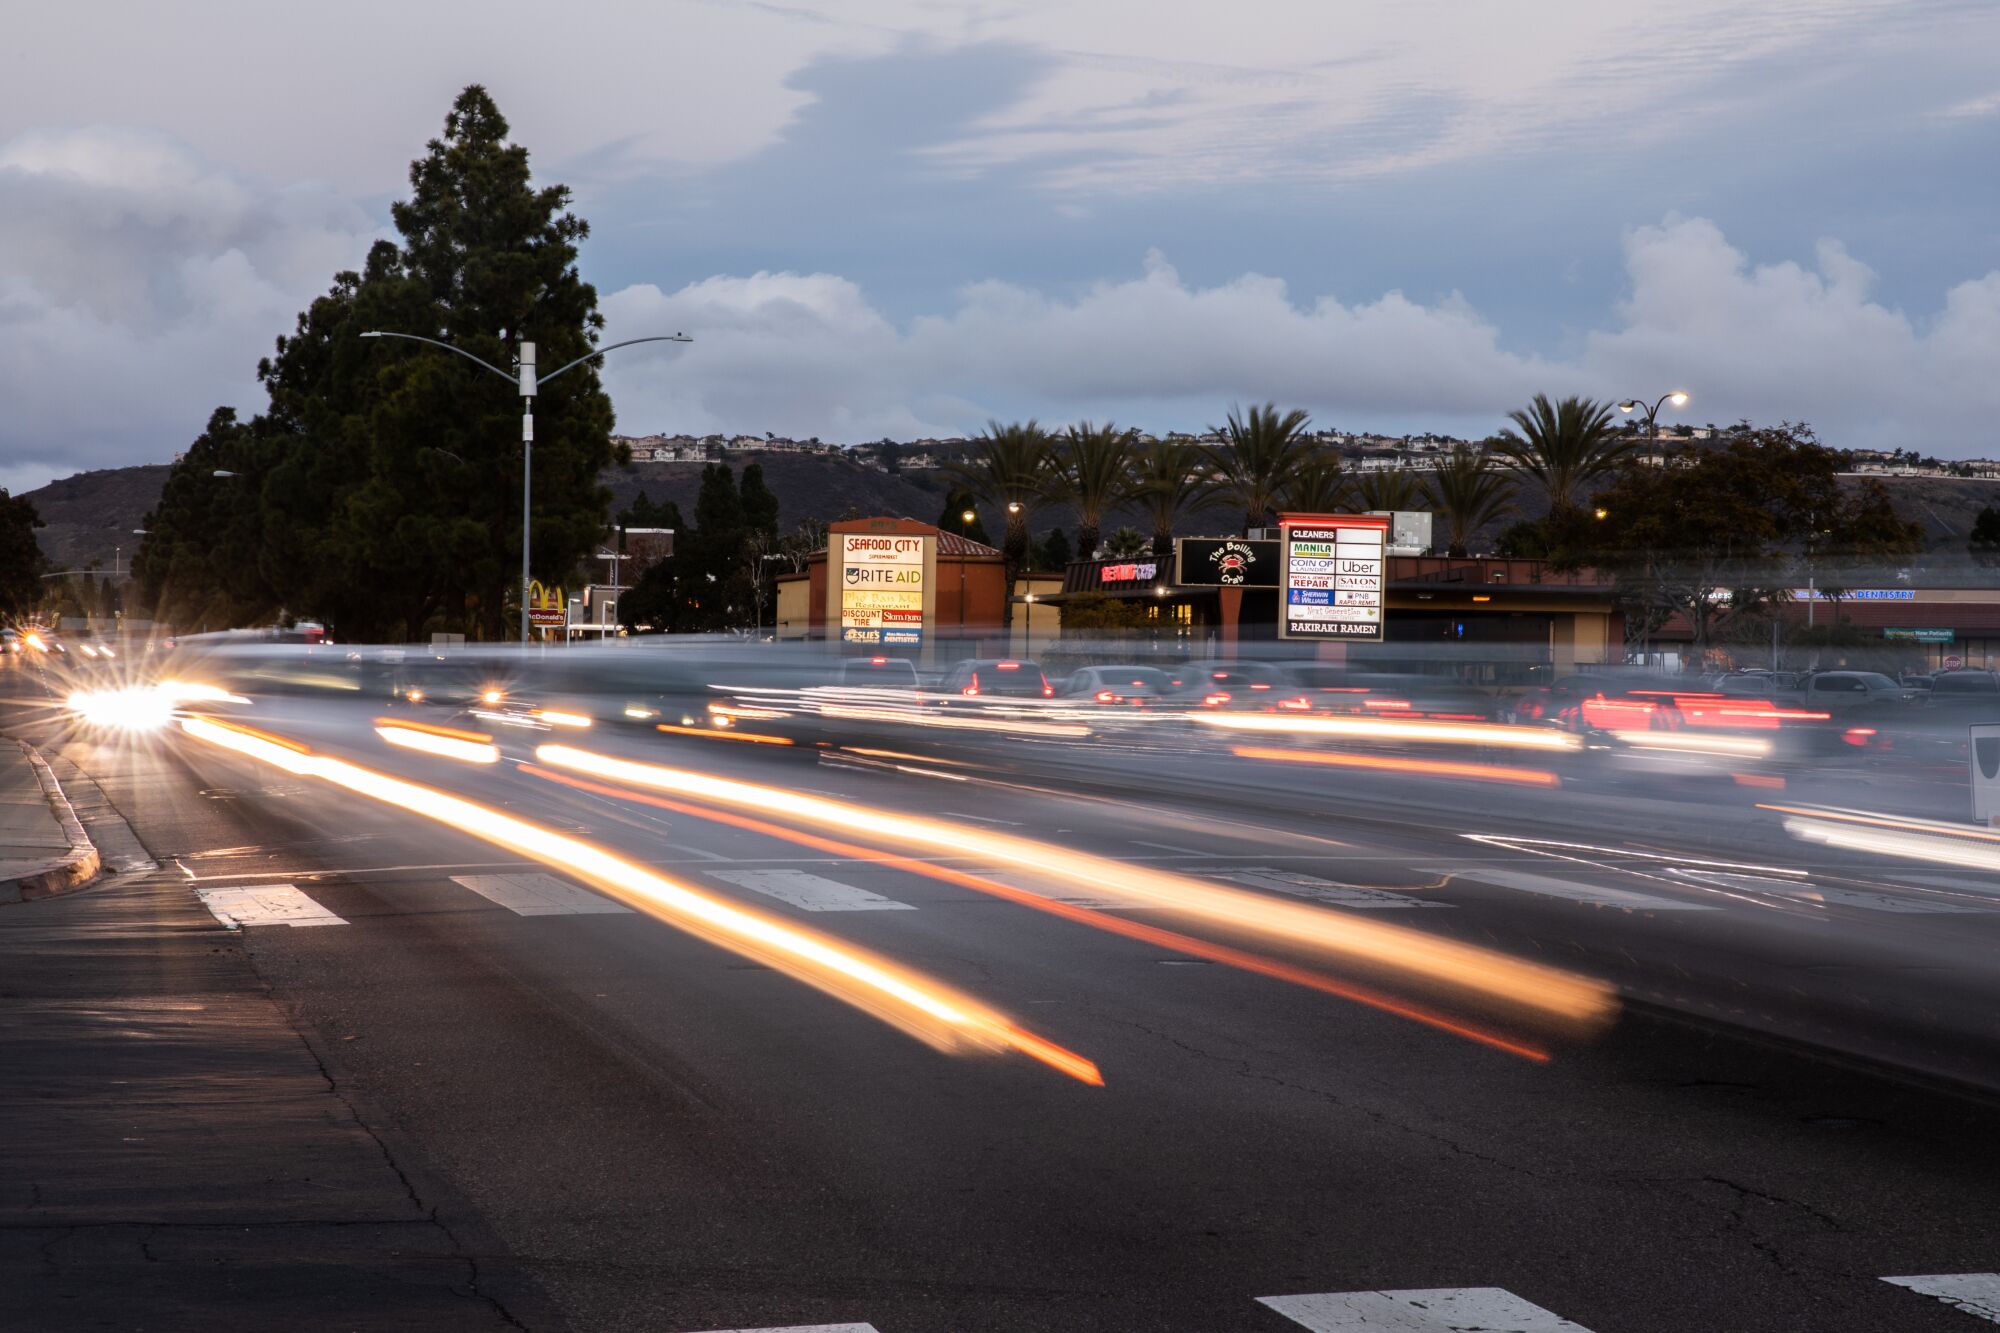 A long-exposure photo of traffic on a busy road at sunset shows cars' headlights and brake lights as red and white streaks.